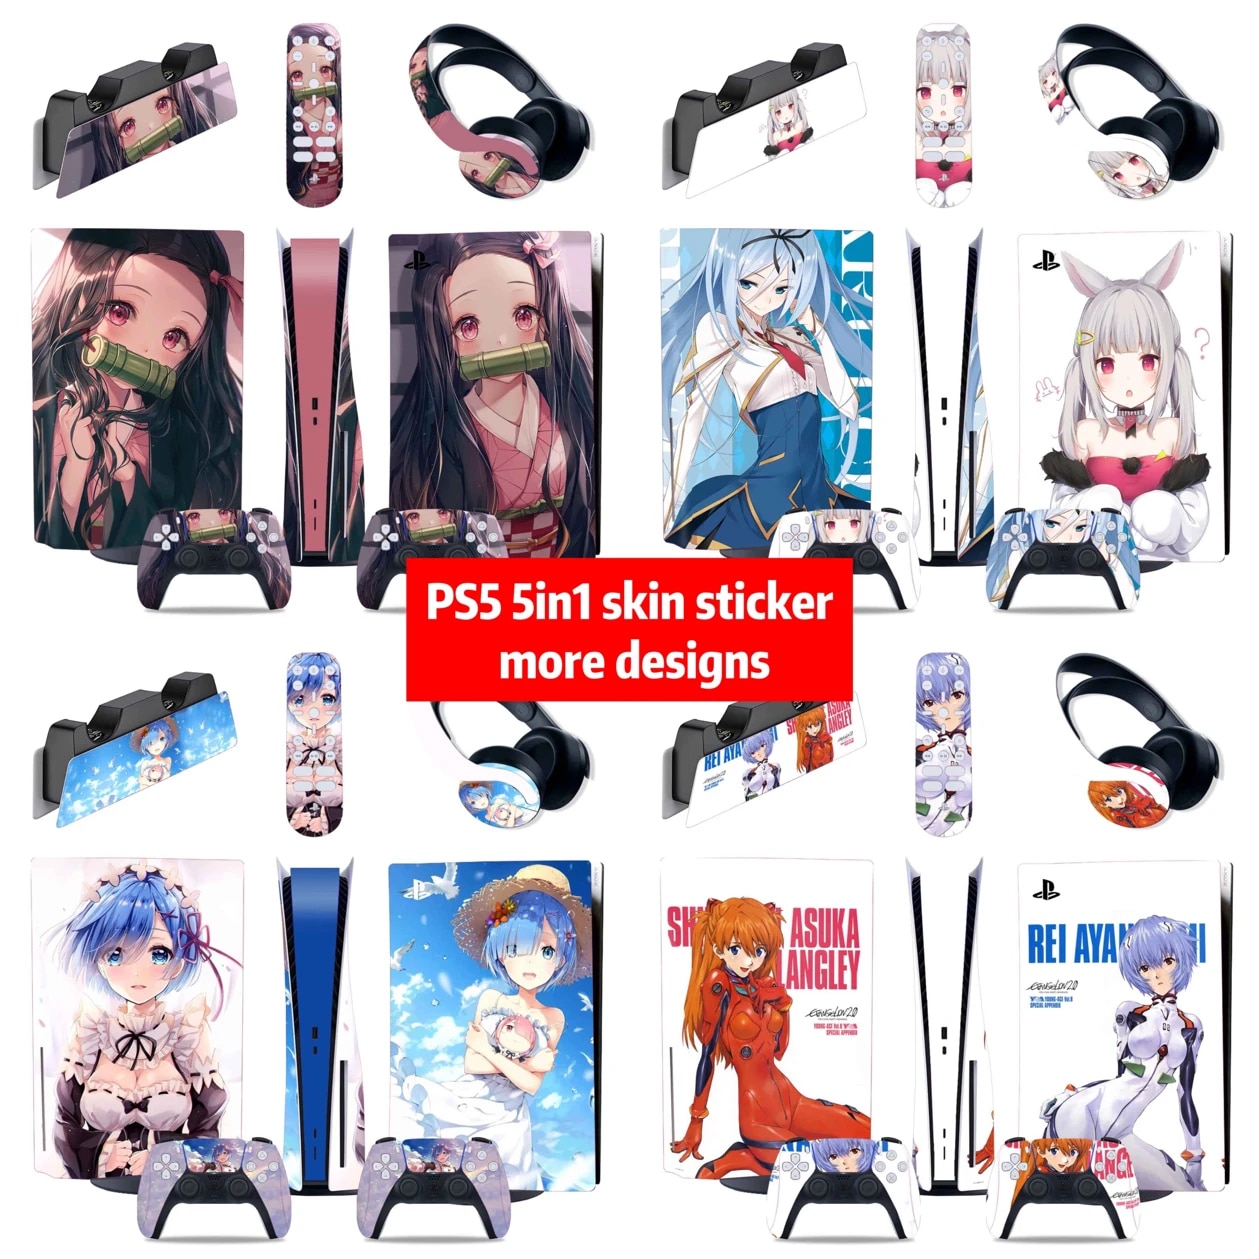 【Must-Have Gadgets】 Girls Design 5 In 1 Full Set Skin For Ps5 Disk Console Sticker Decal For Ps5 Controller Charge Stand Headset Remote